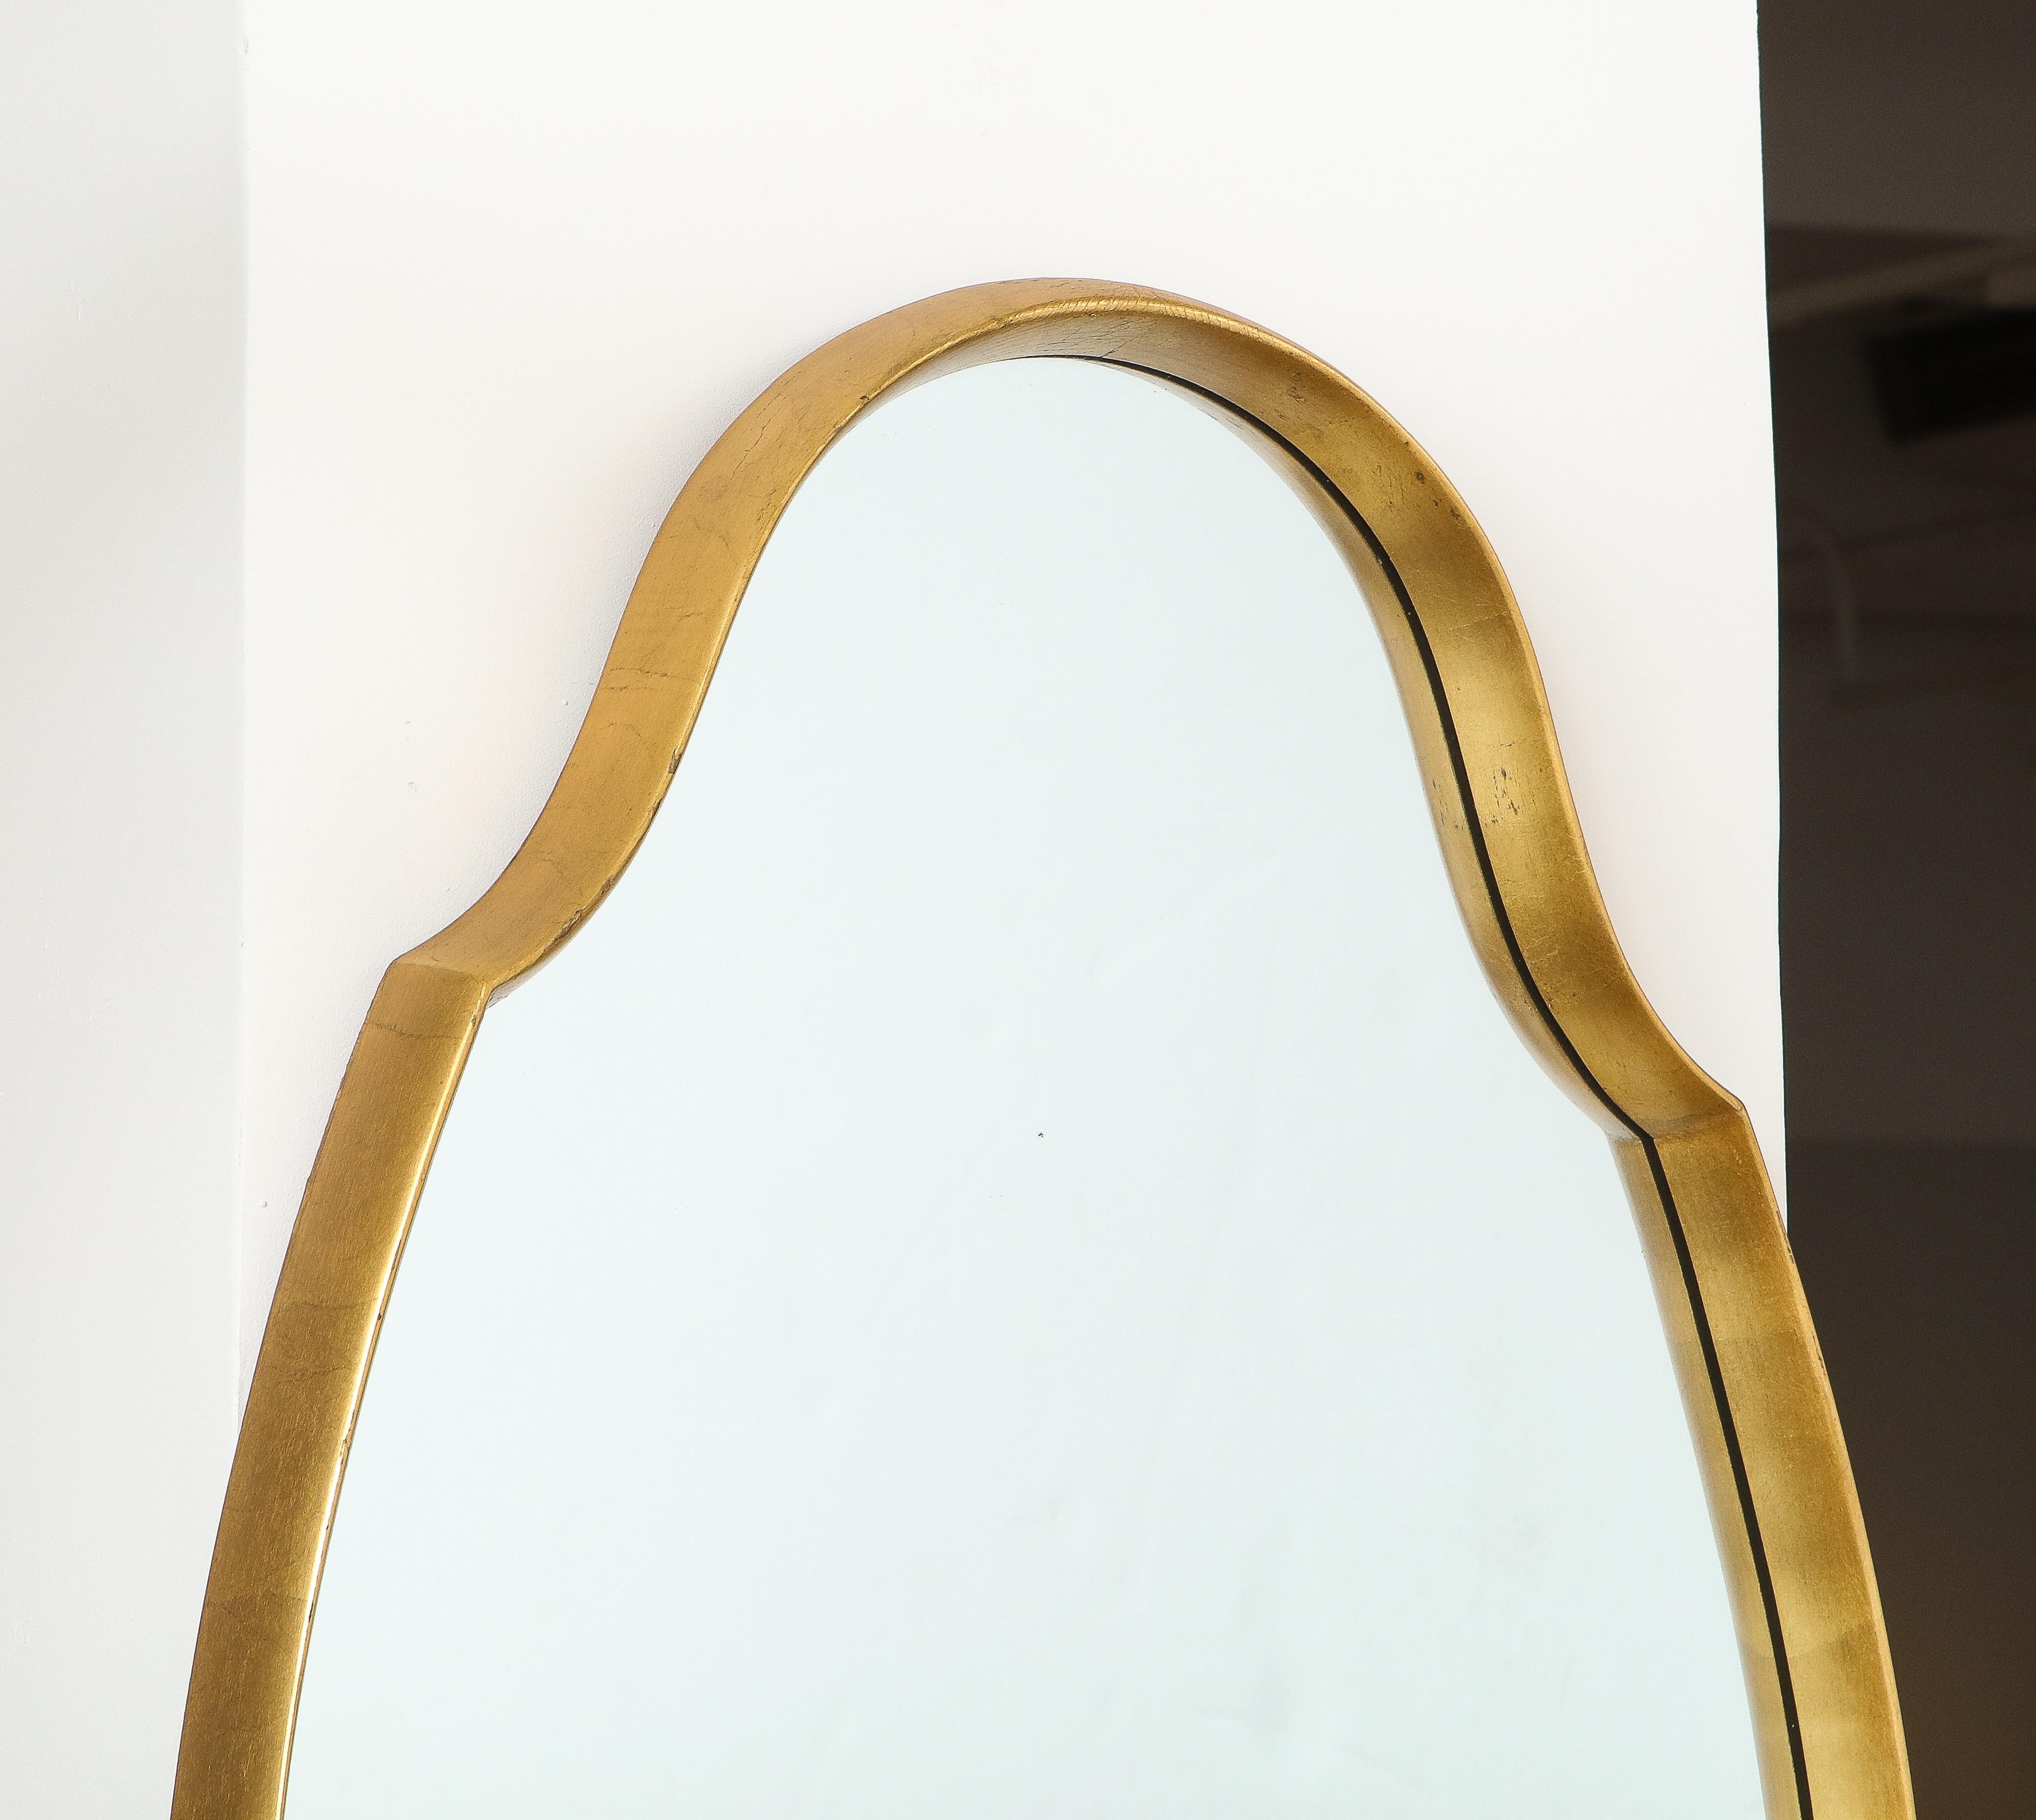 1960's Mid-Century Modern Gold Leaf Mirror in the Style of La Barge For Sale 2